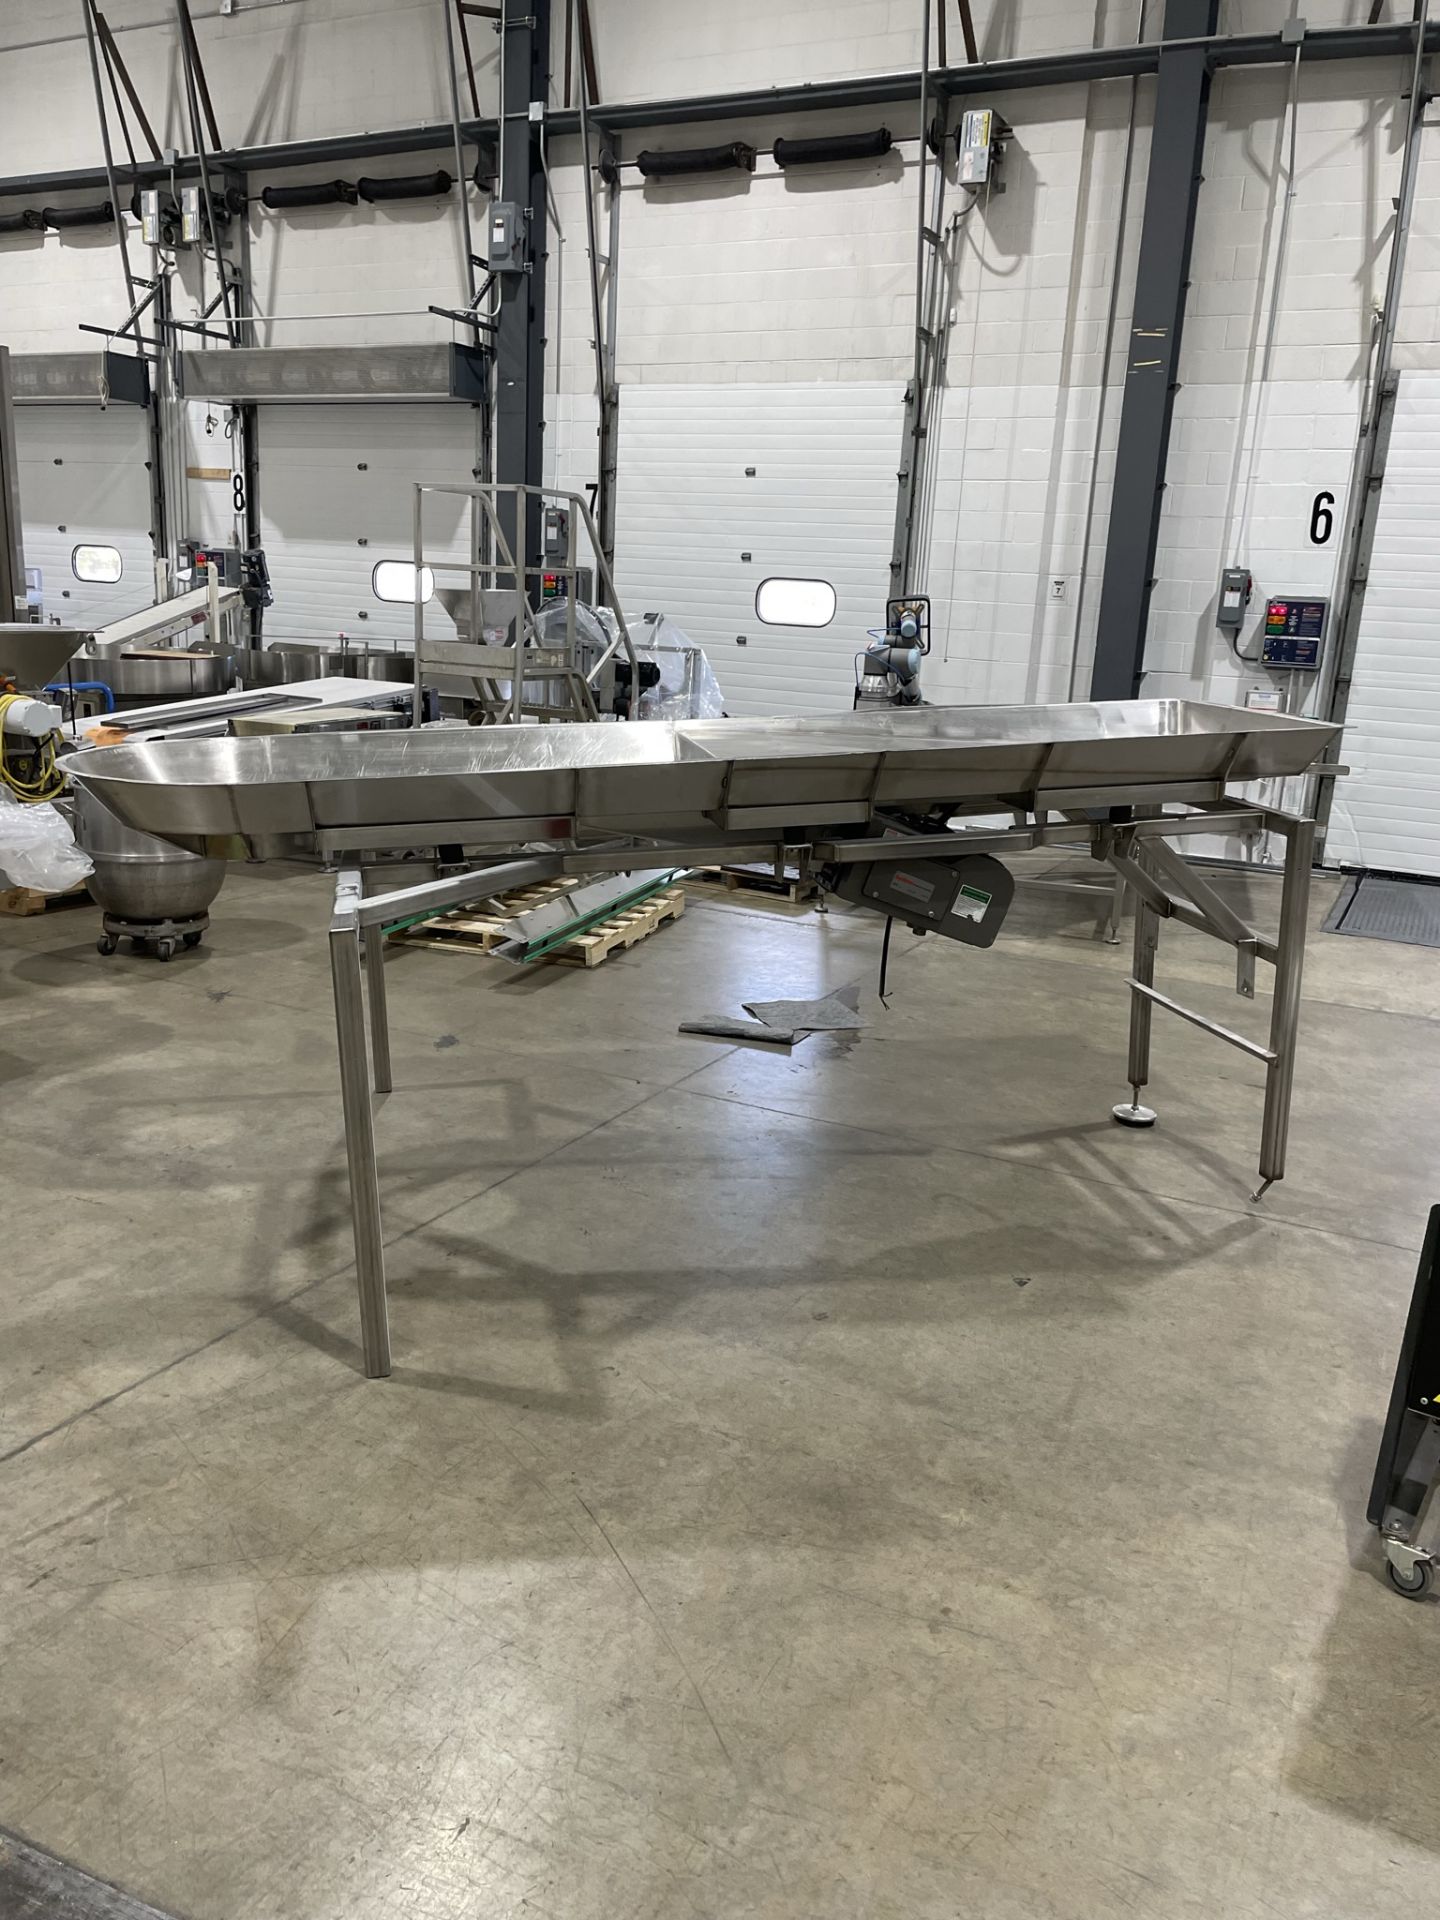 Syntron Stainless Steel Vibratory Feeding Conveyor,Model#FH24-C, serial#T106497 order#T222905, 445 - Image 5 of 6